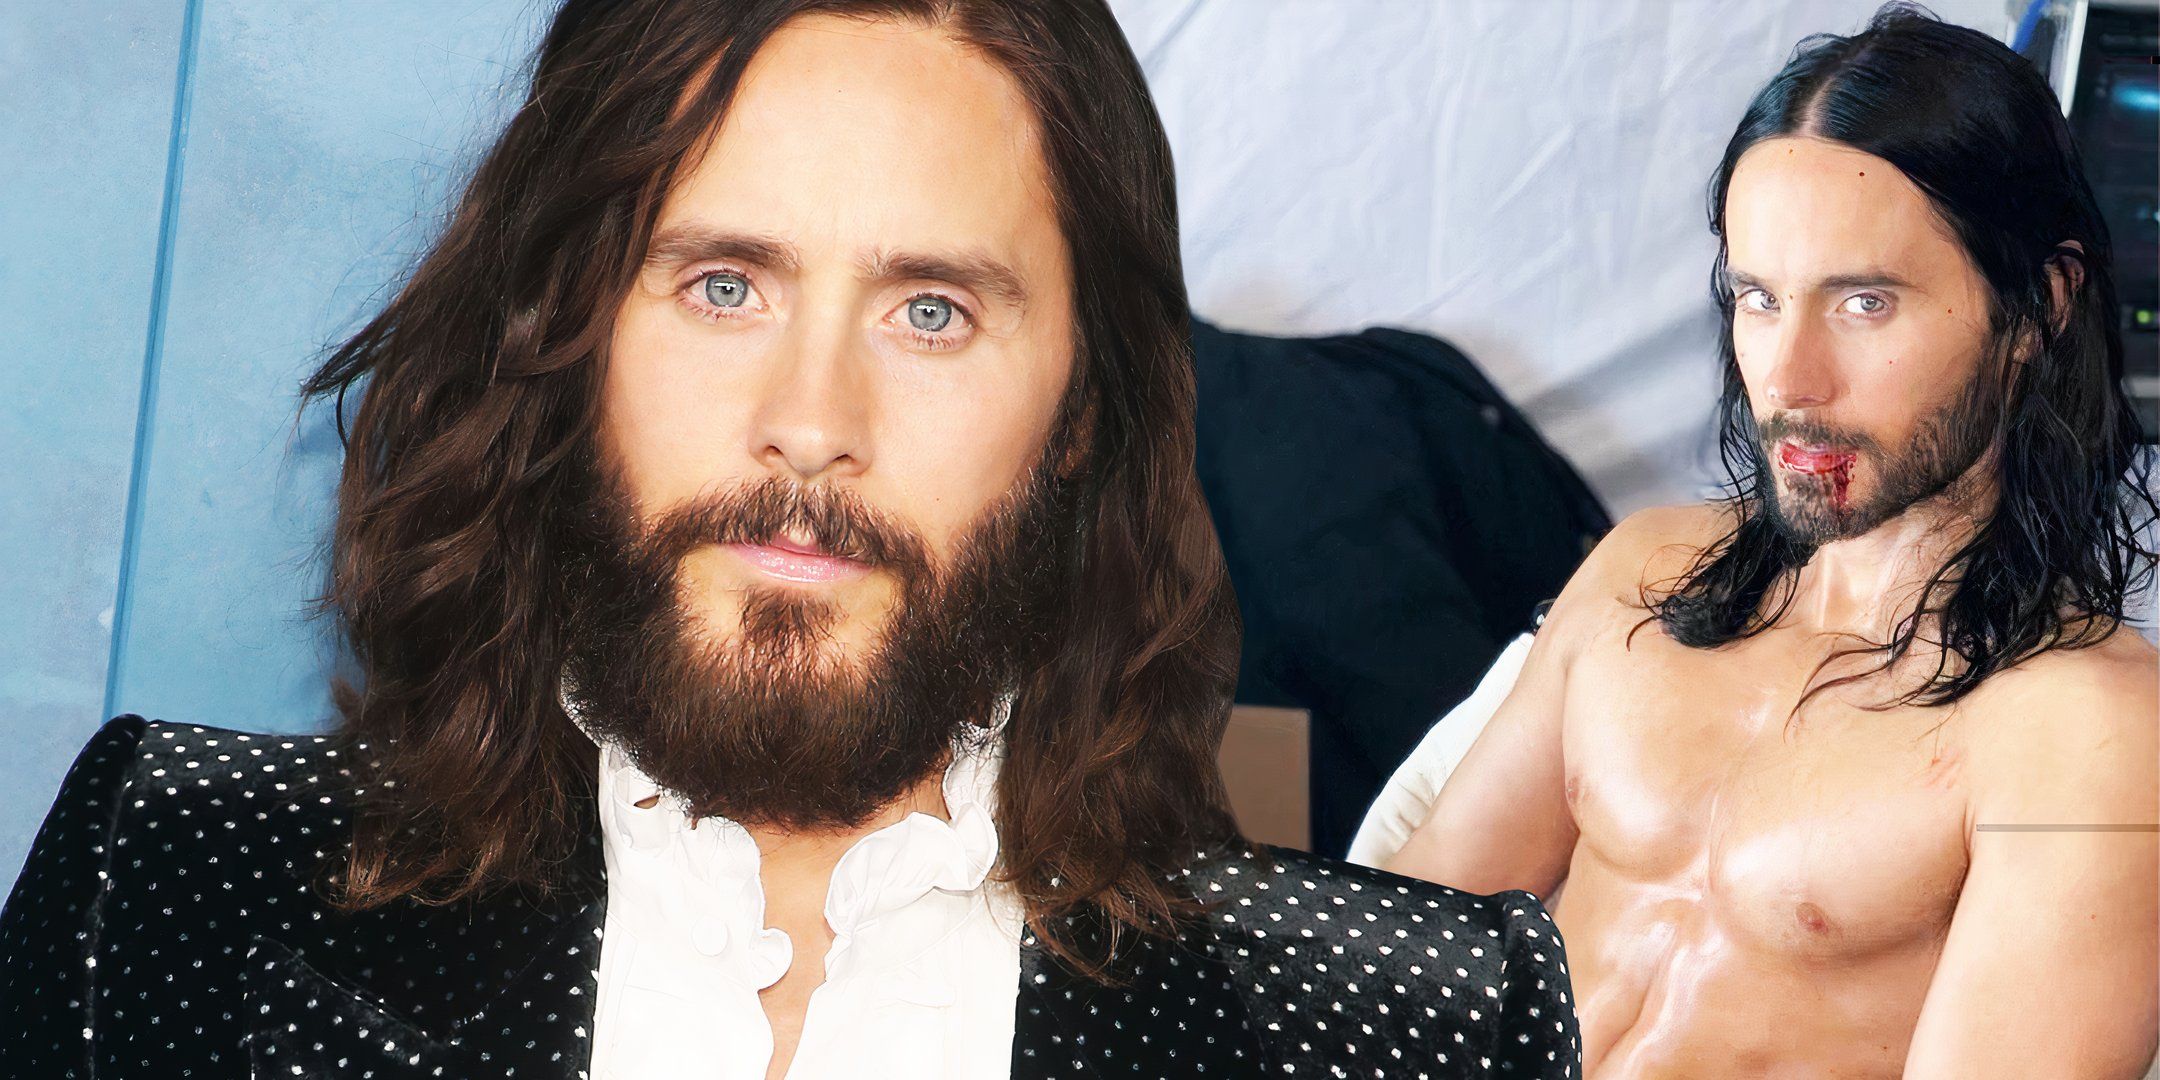 Jared Leto's Appearance Shocked Fans After A Shirtless Photo Went Viral